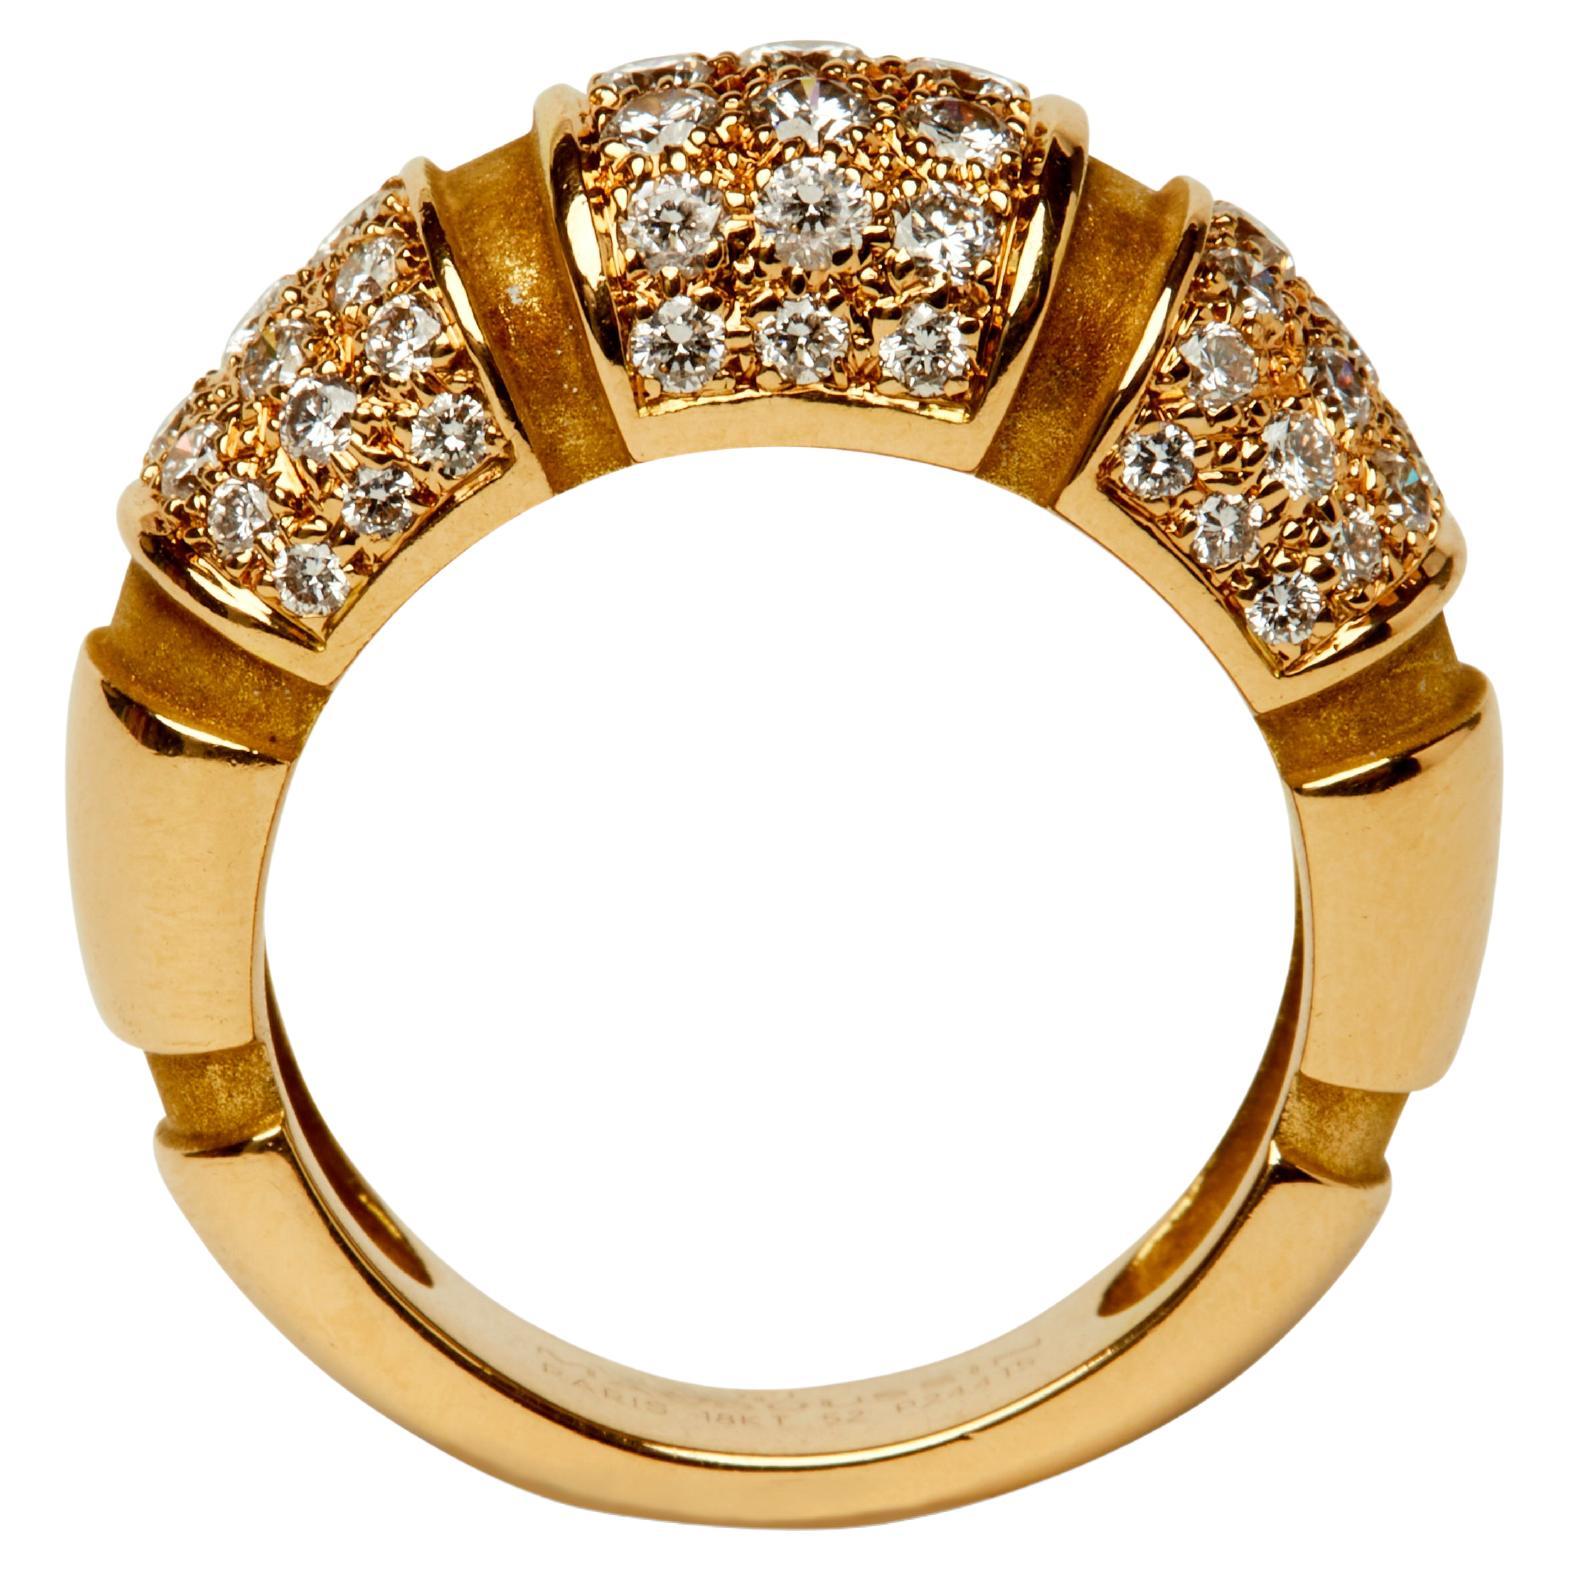 This Mauboussin bombé-form ring is an elegantly simple design that stands on its own or is easily stackable. The yellow gold ribbed dome is divided into three sections set with fine white round brilliant cut diamonds.

Size 6
63 round brilliant cut